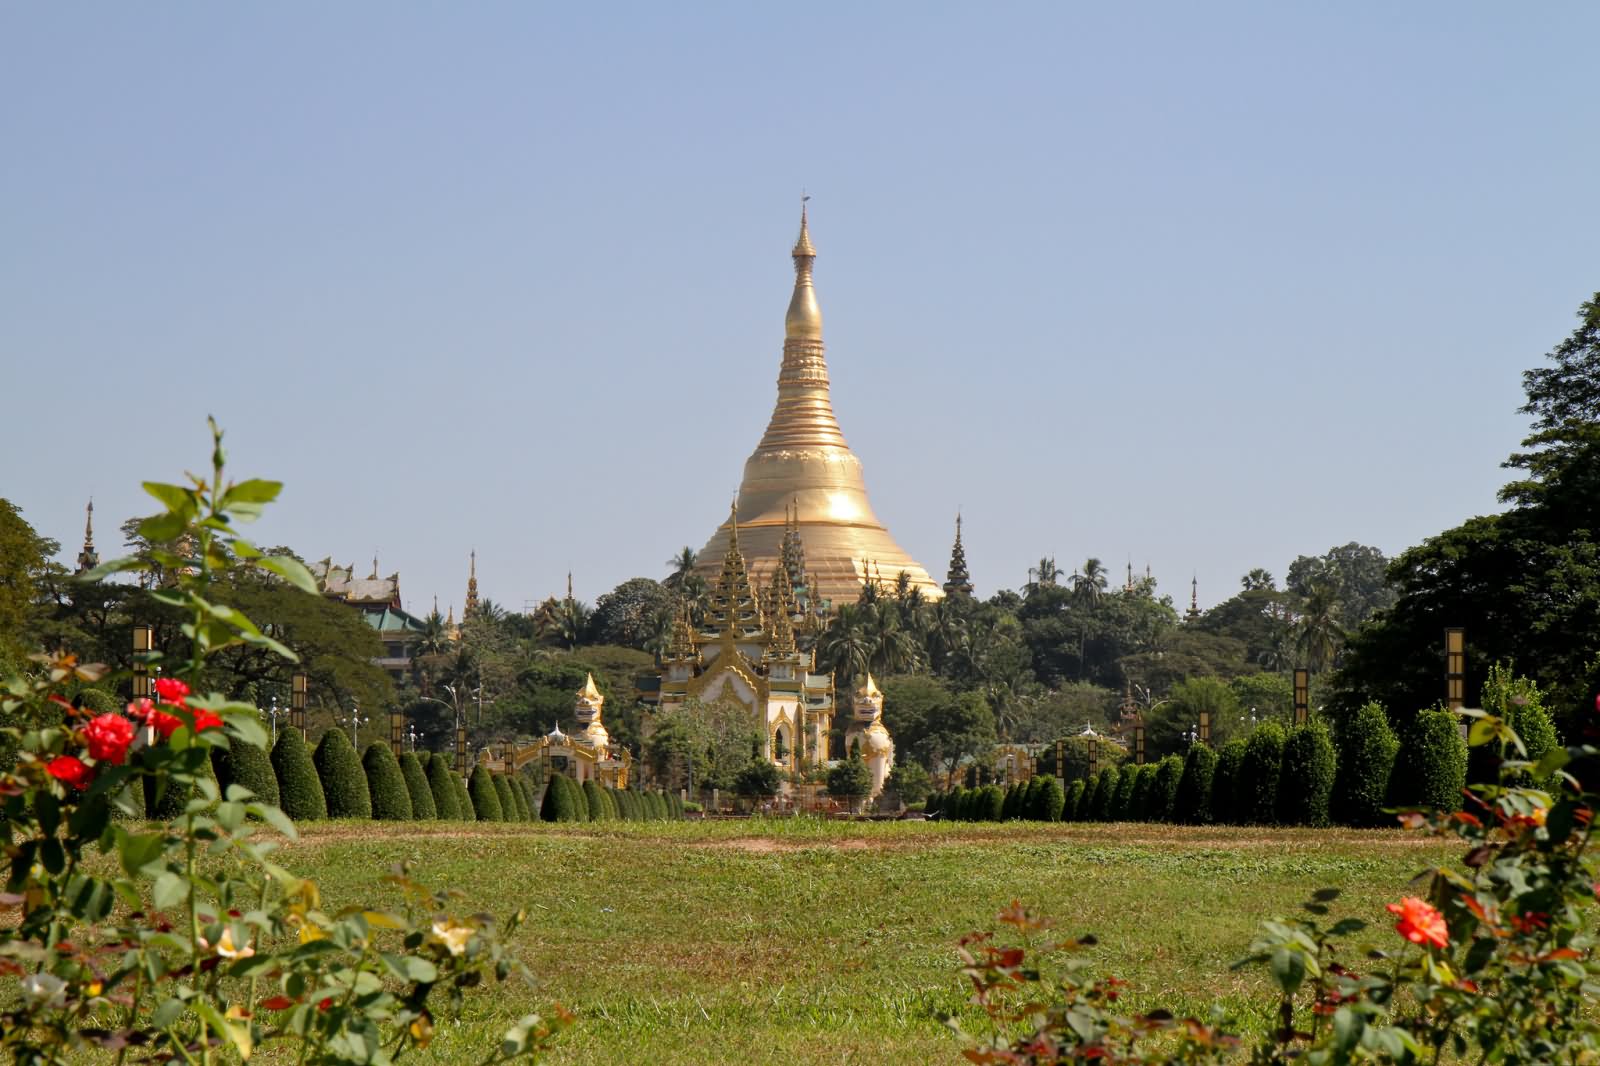 Picture Of Shwedagon Pagoda From Garden